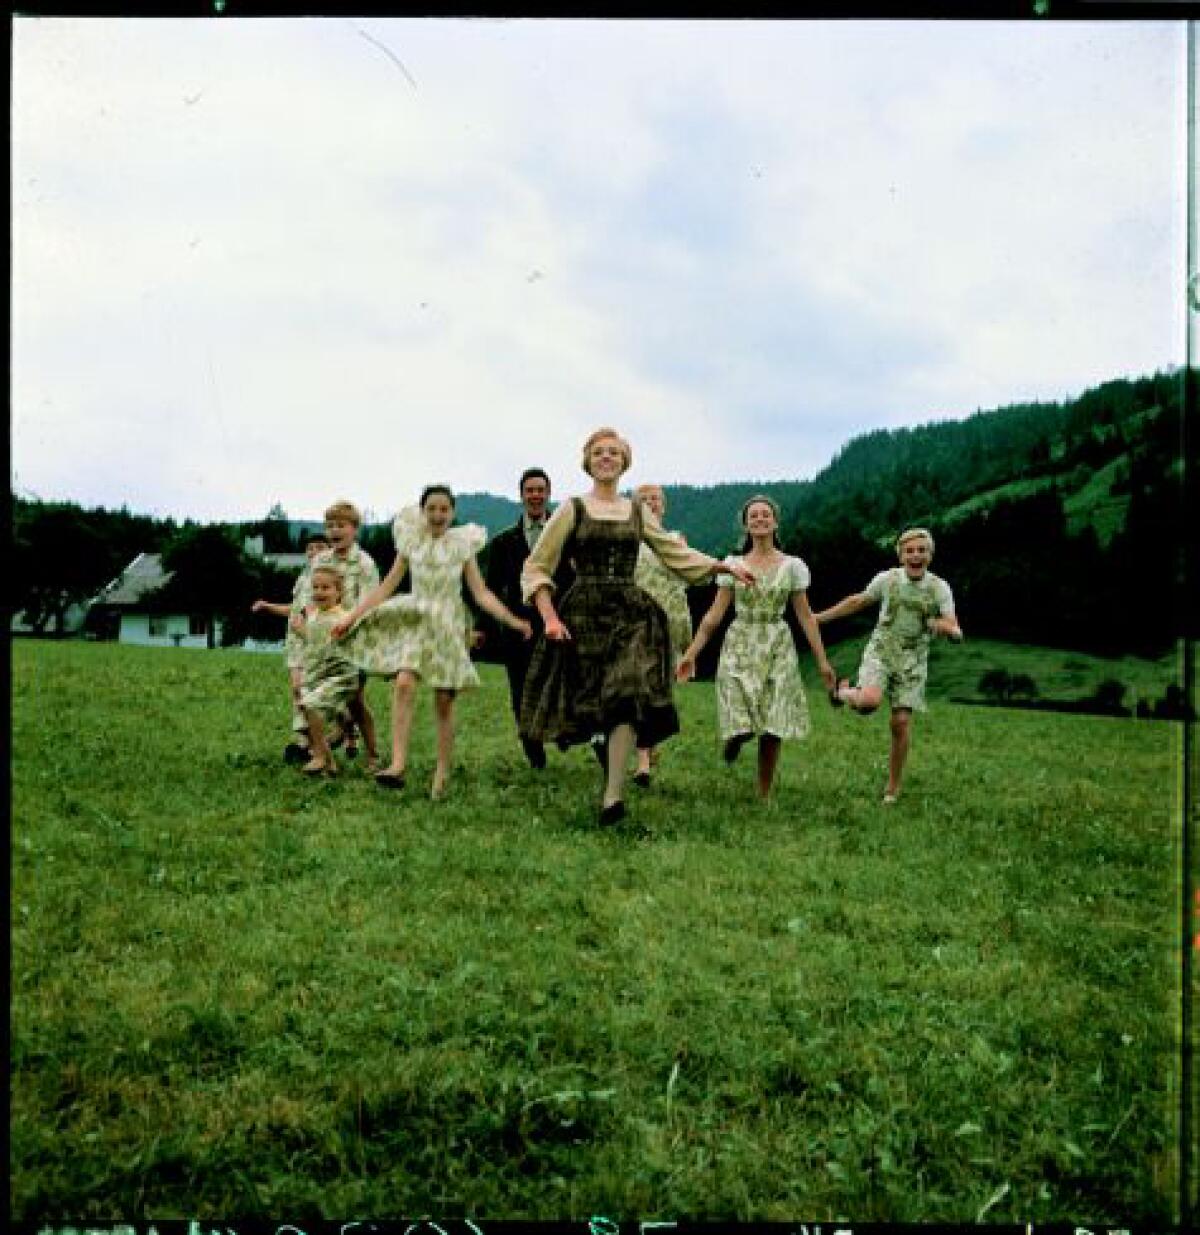 Children run in a field, led by a woman 